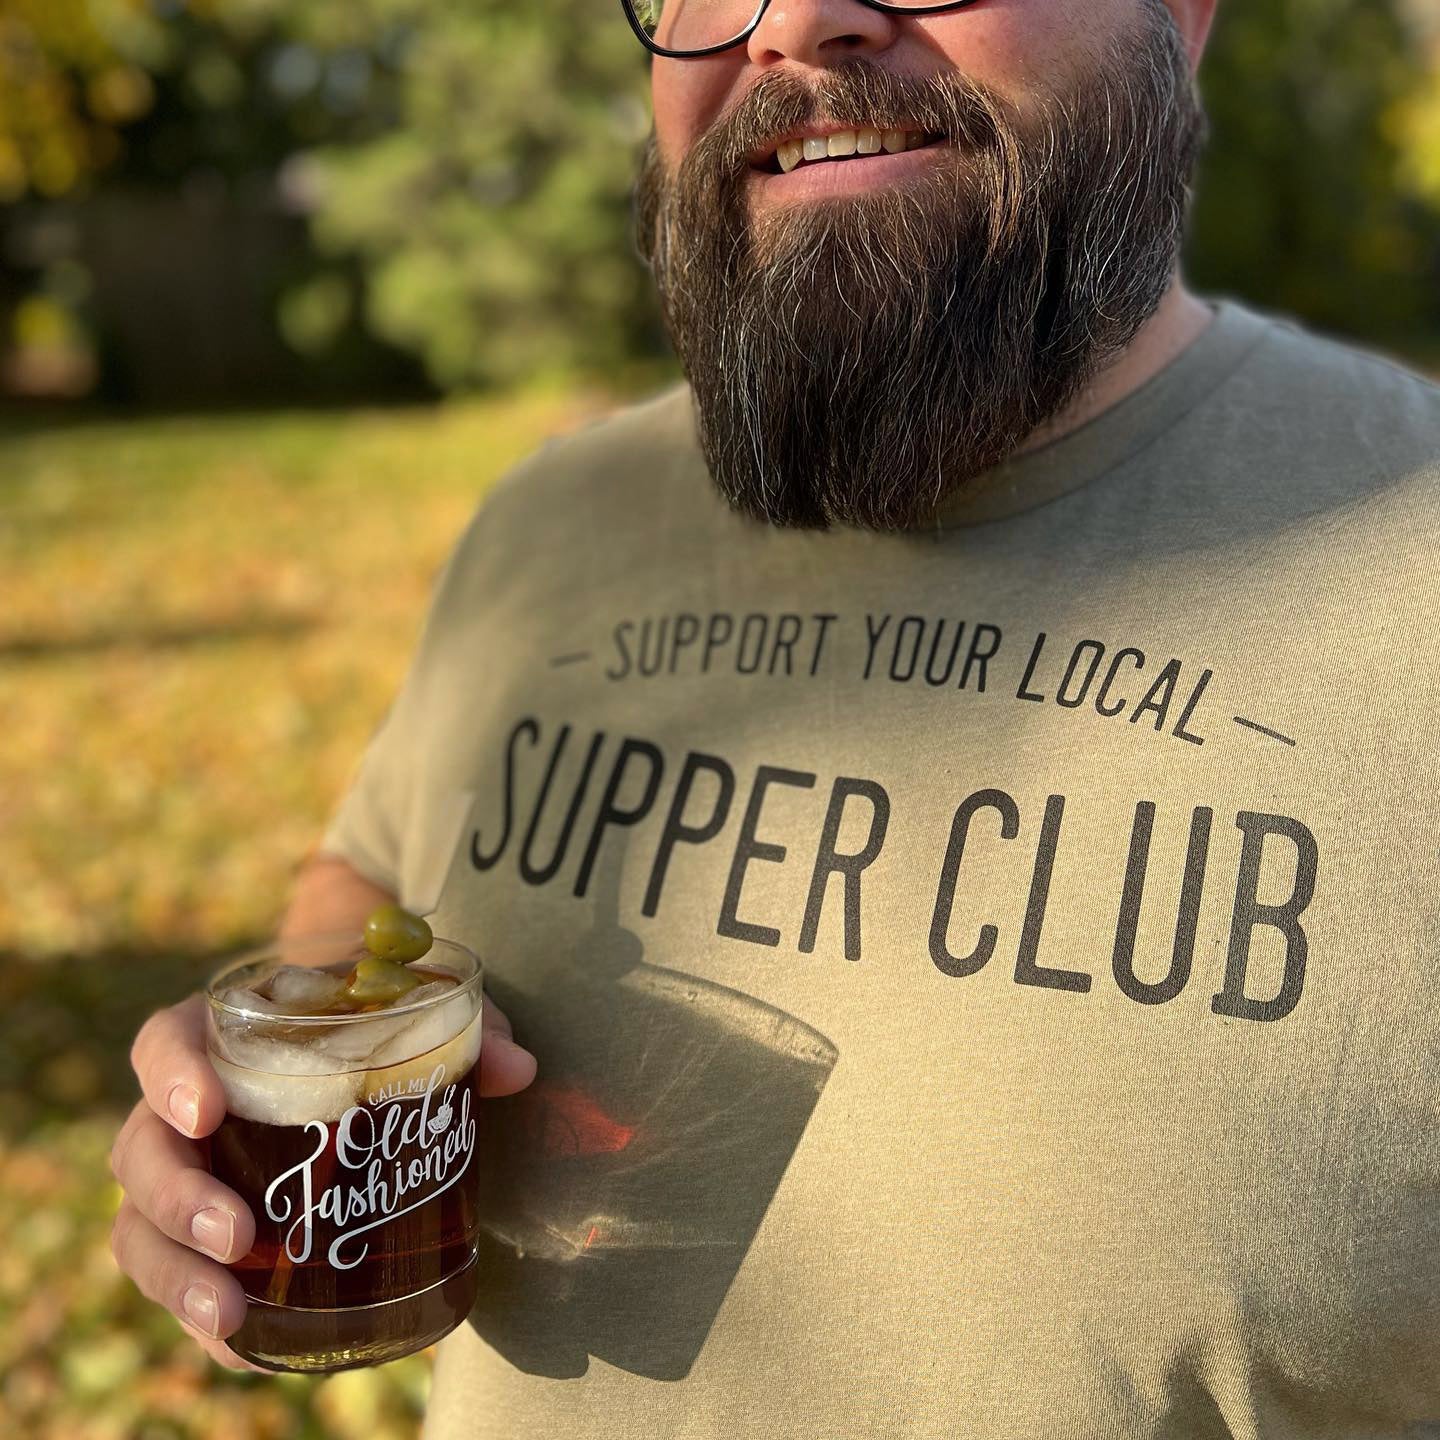 Support Your Local Supper Club Tee. Tan.